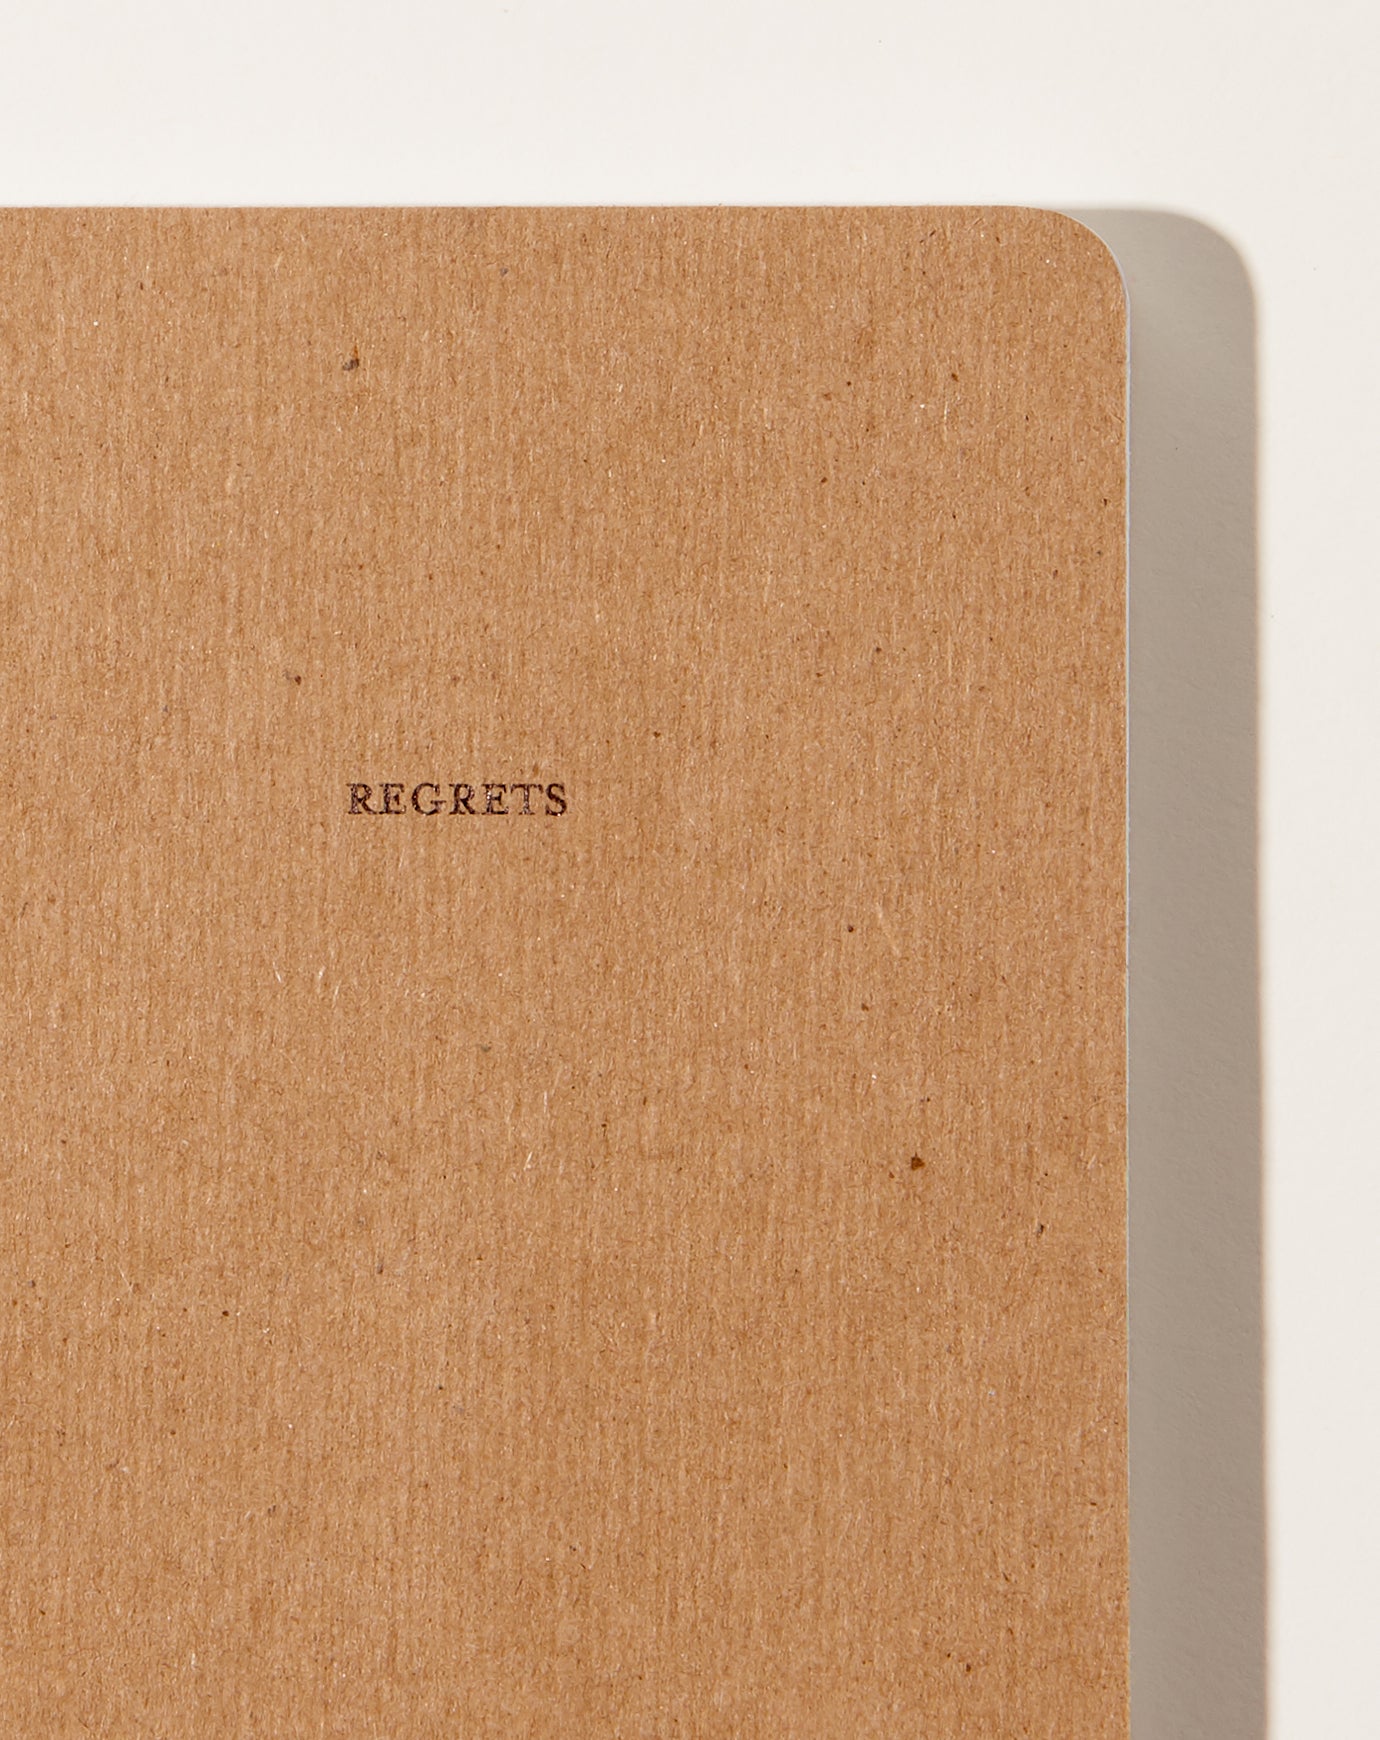 Set Editions Tally Notebook: Regrets